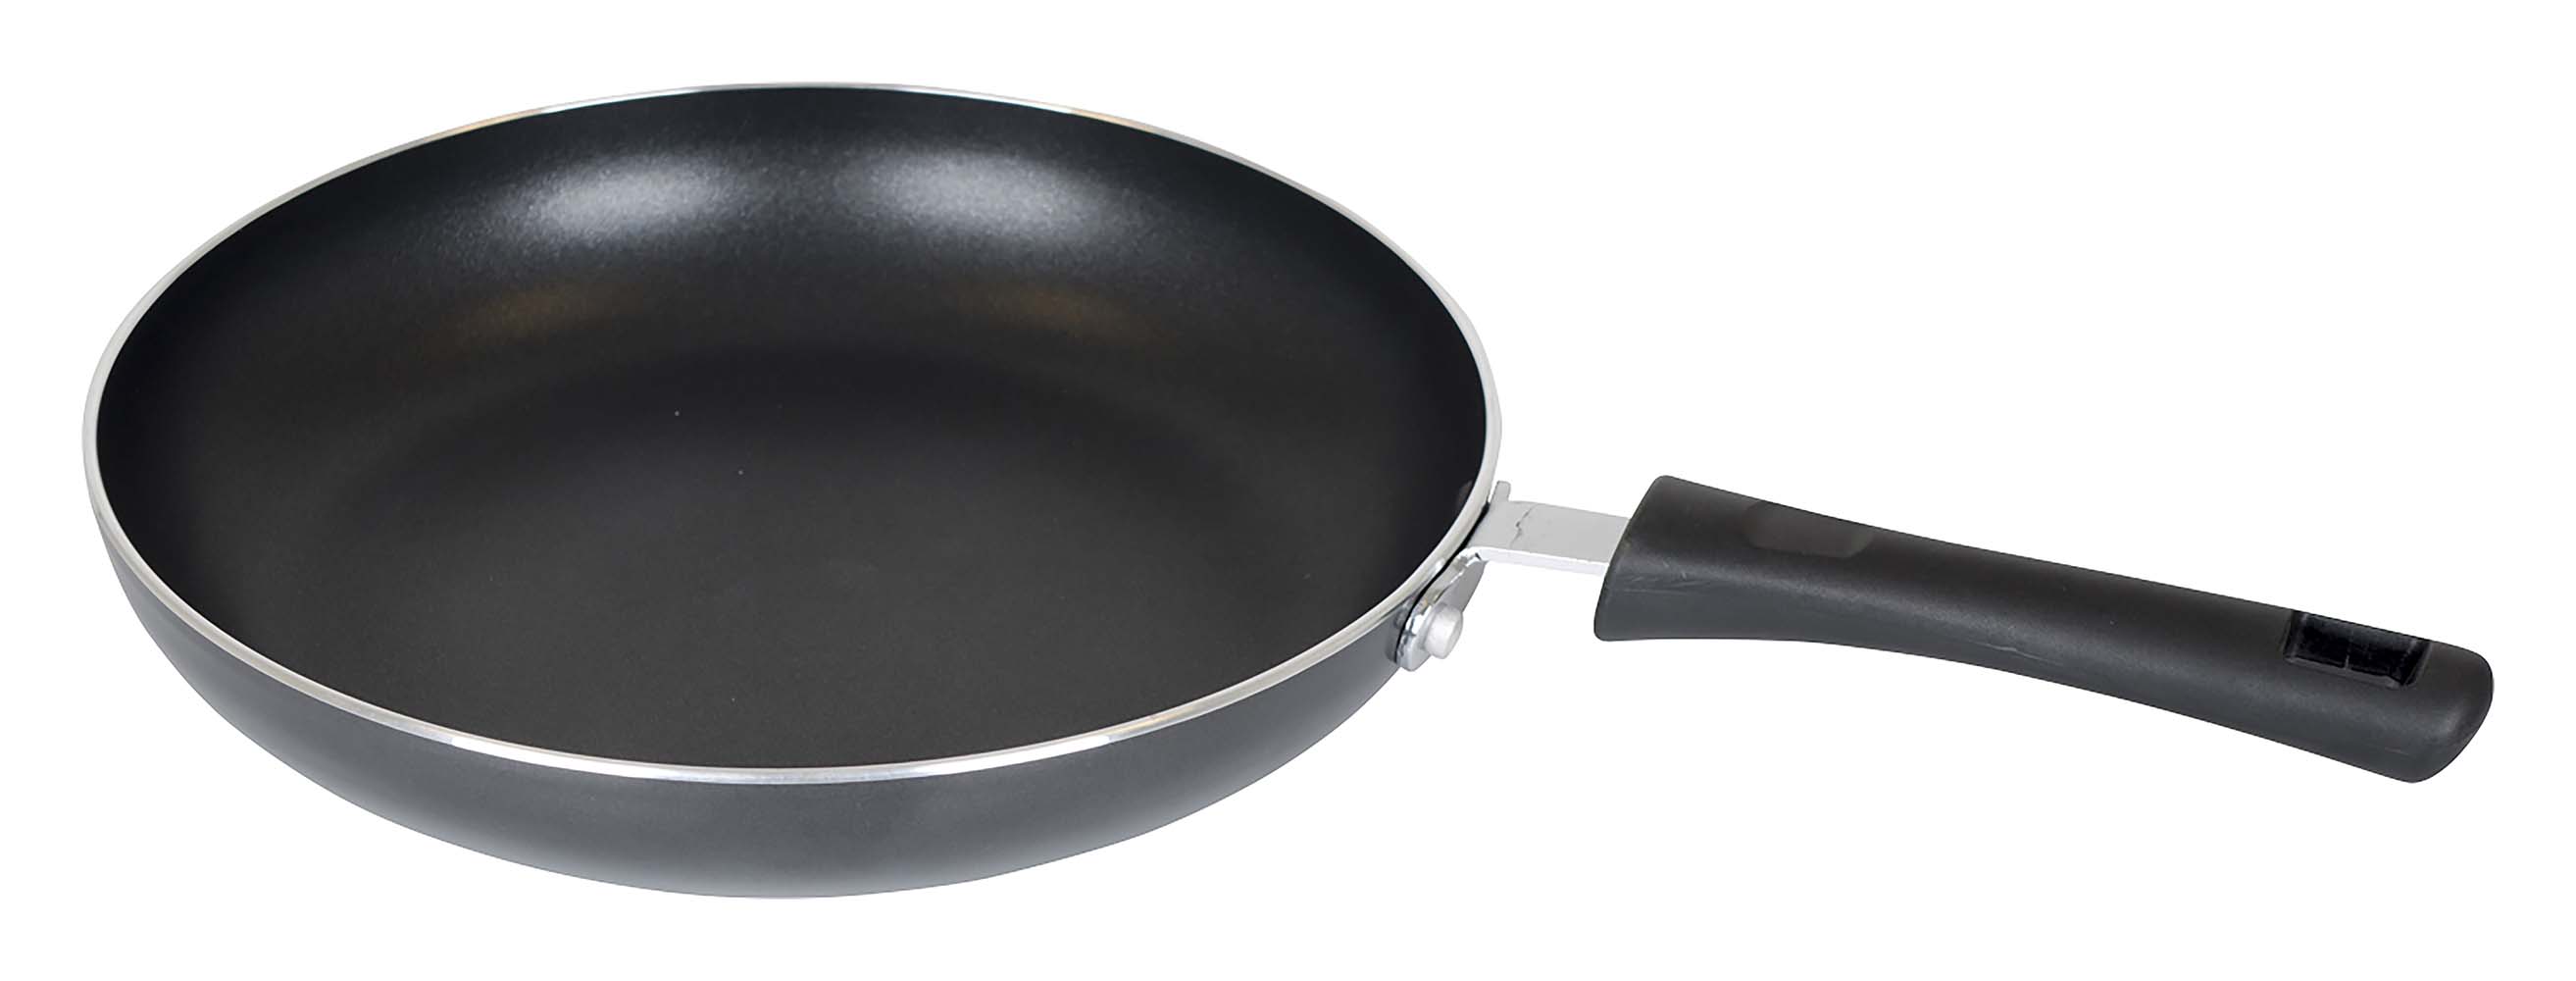 2304370 An aluminium frying pan. Provided with a non-stick coating. Suitable for the following heat sources; gas, ceramic and electric. Thickness: 3.5 millimetres.